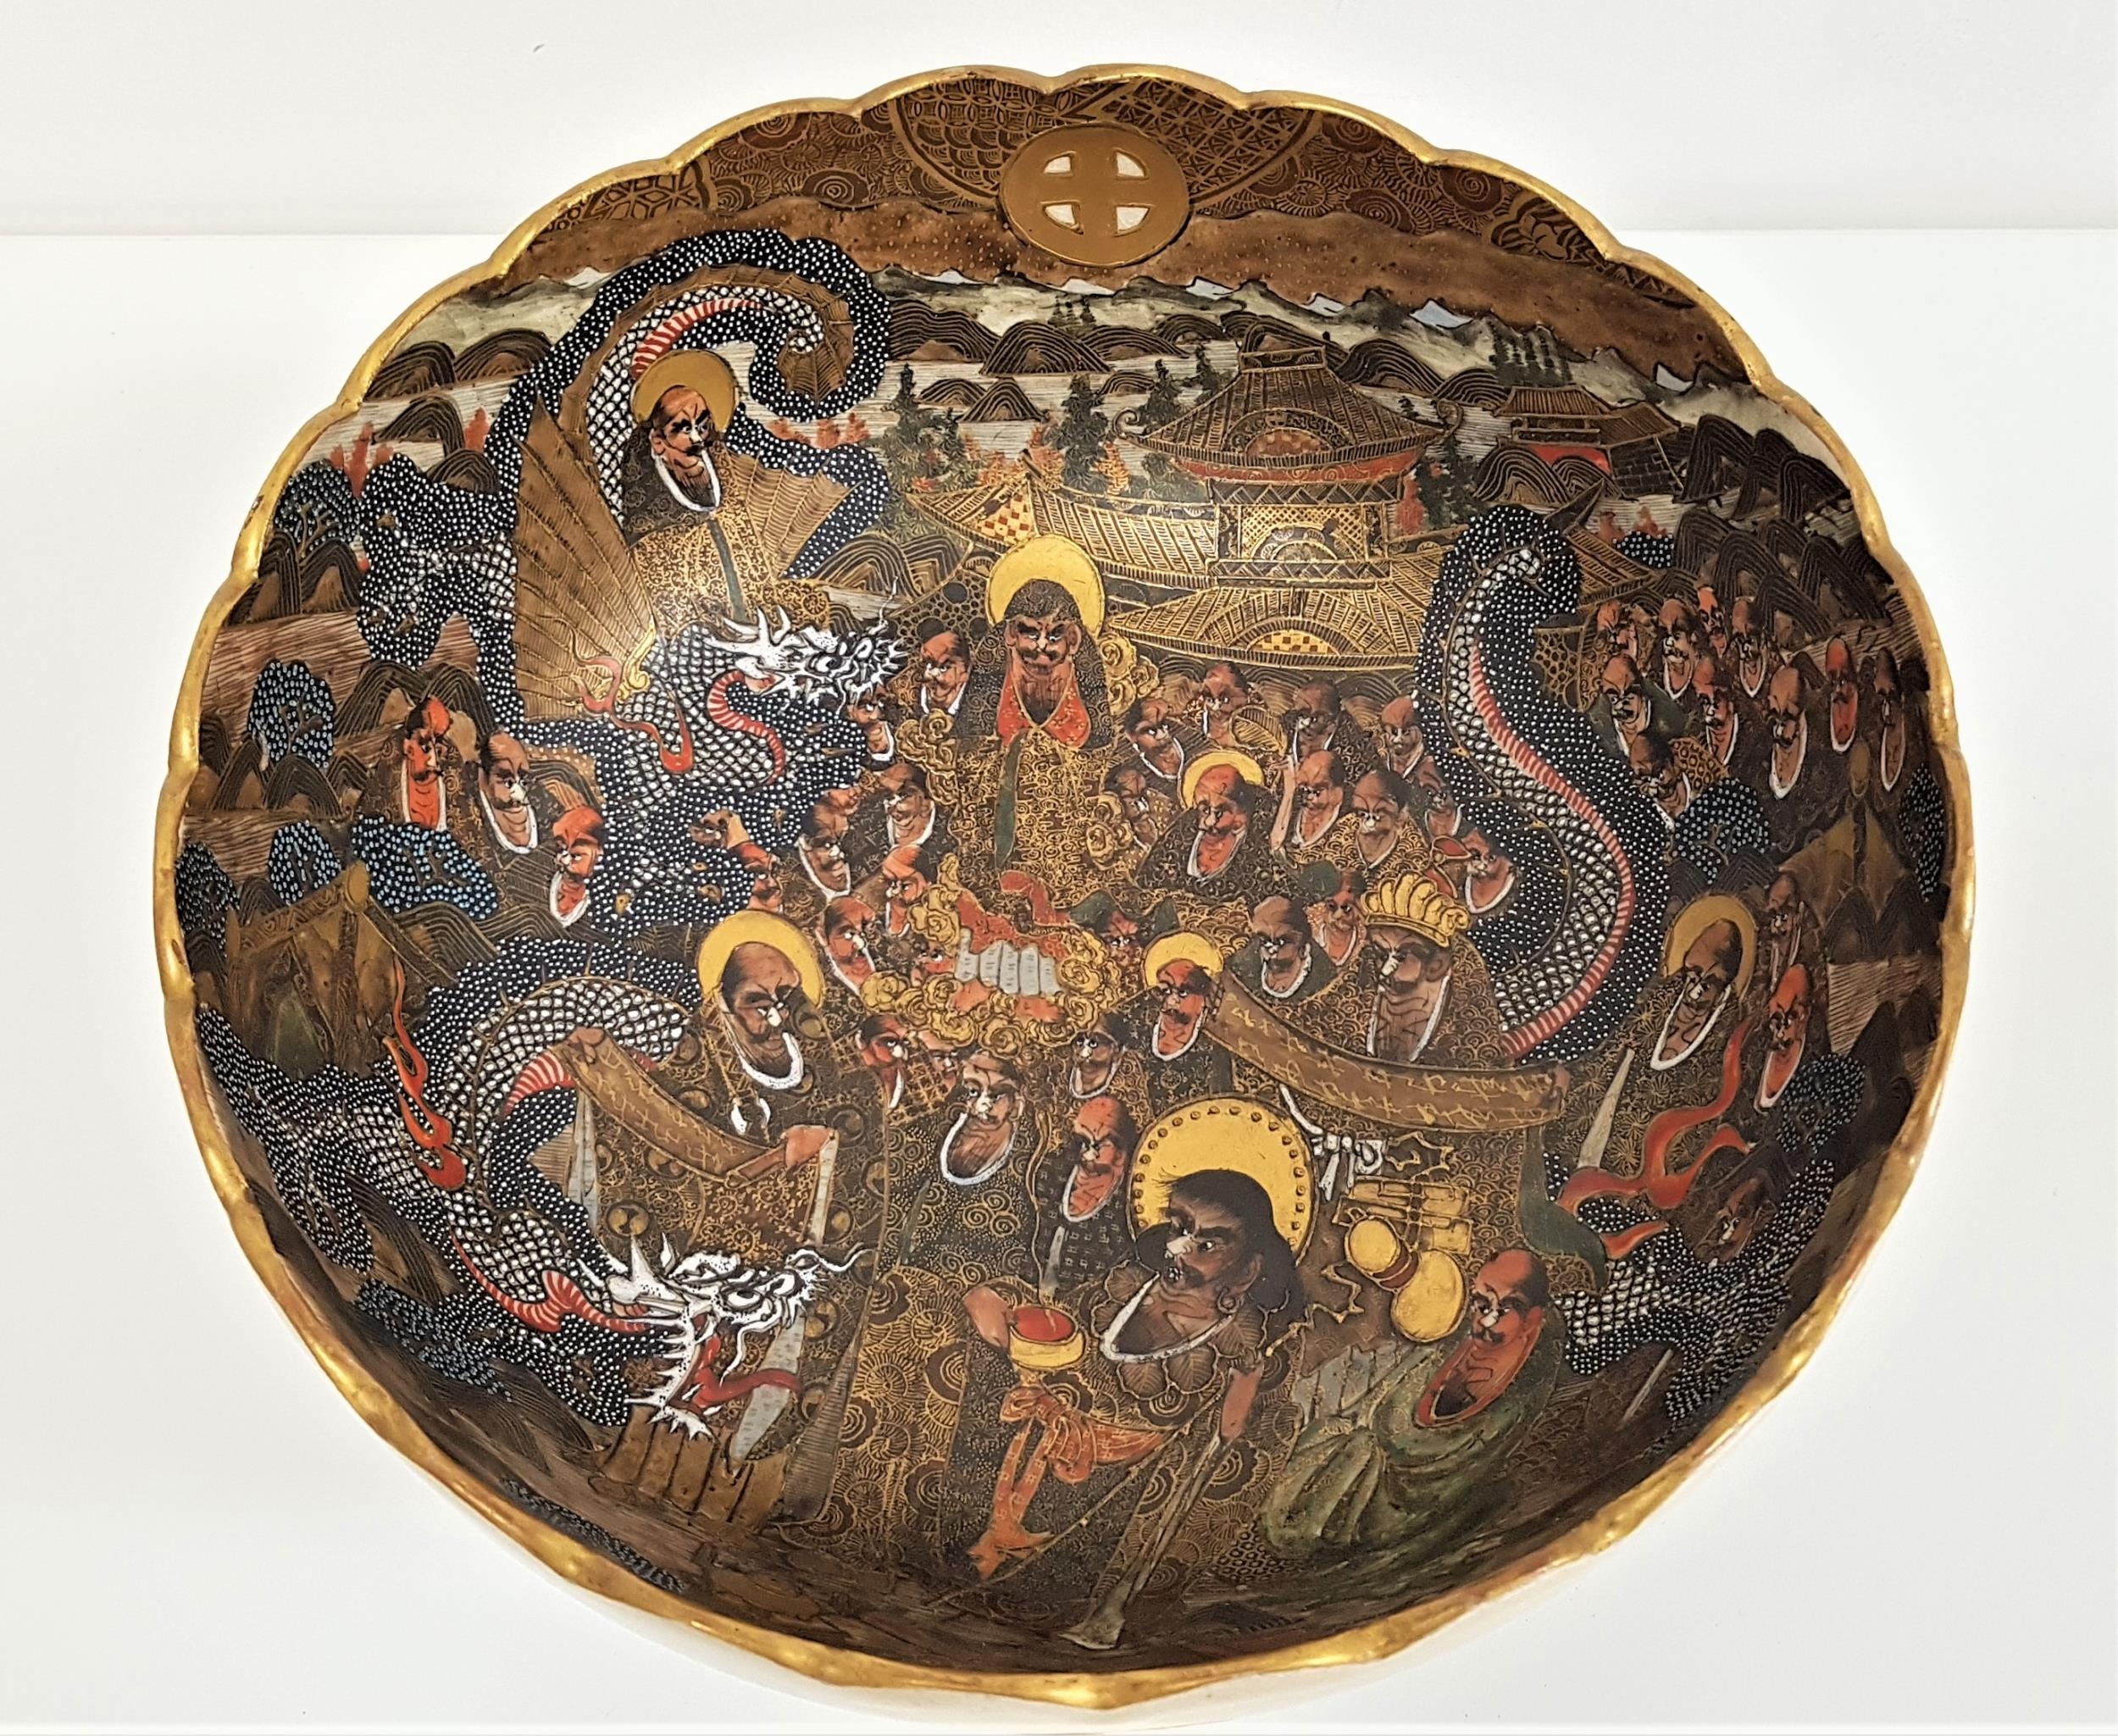 JAPANESE SATSUMA BOWL with a scalloped gilt edge rim, the bowl decorated with two dragons and many - Image 2 of 2